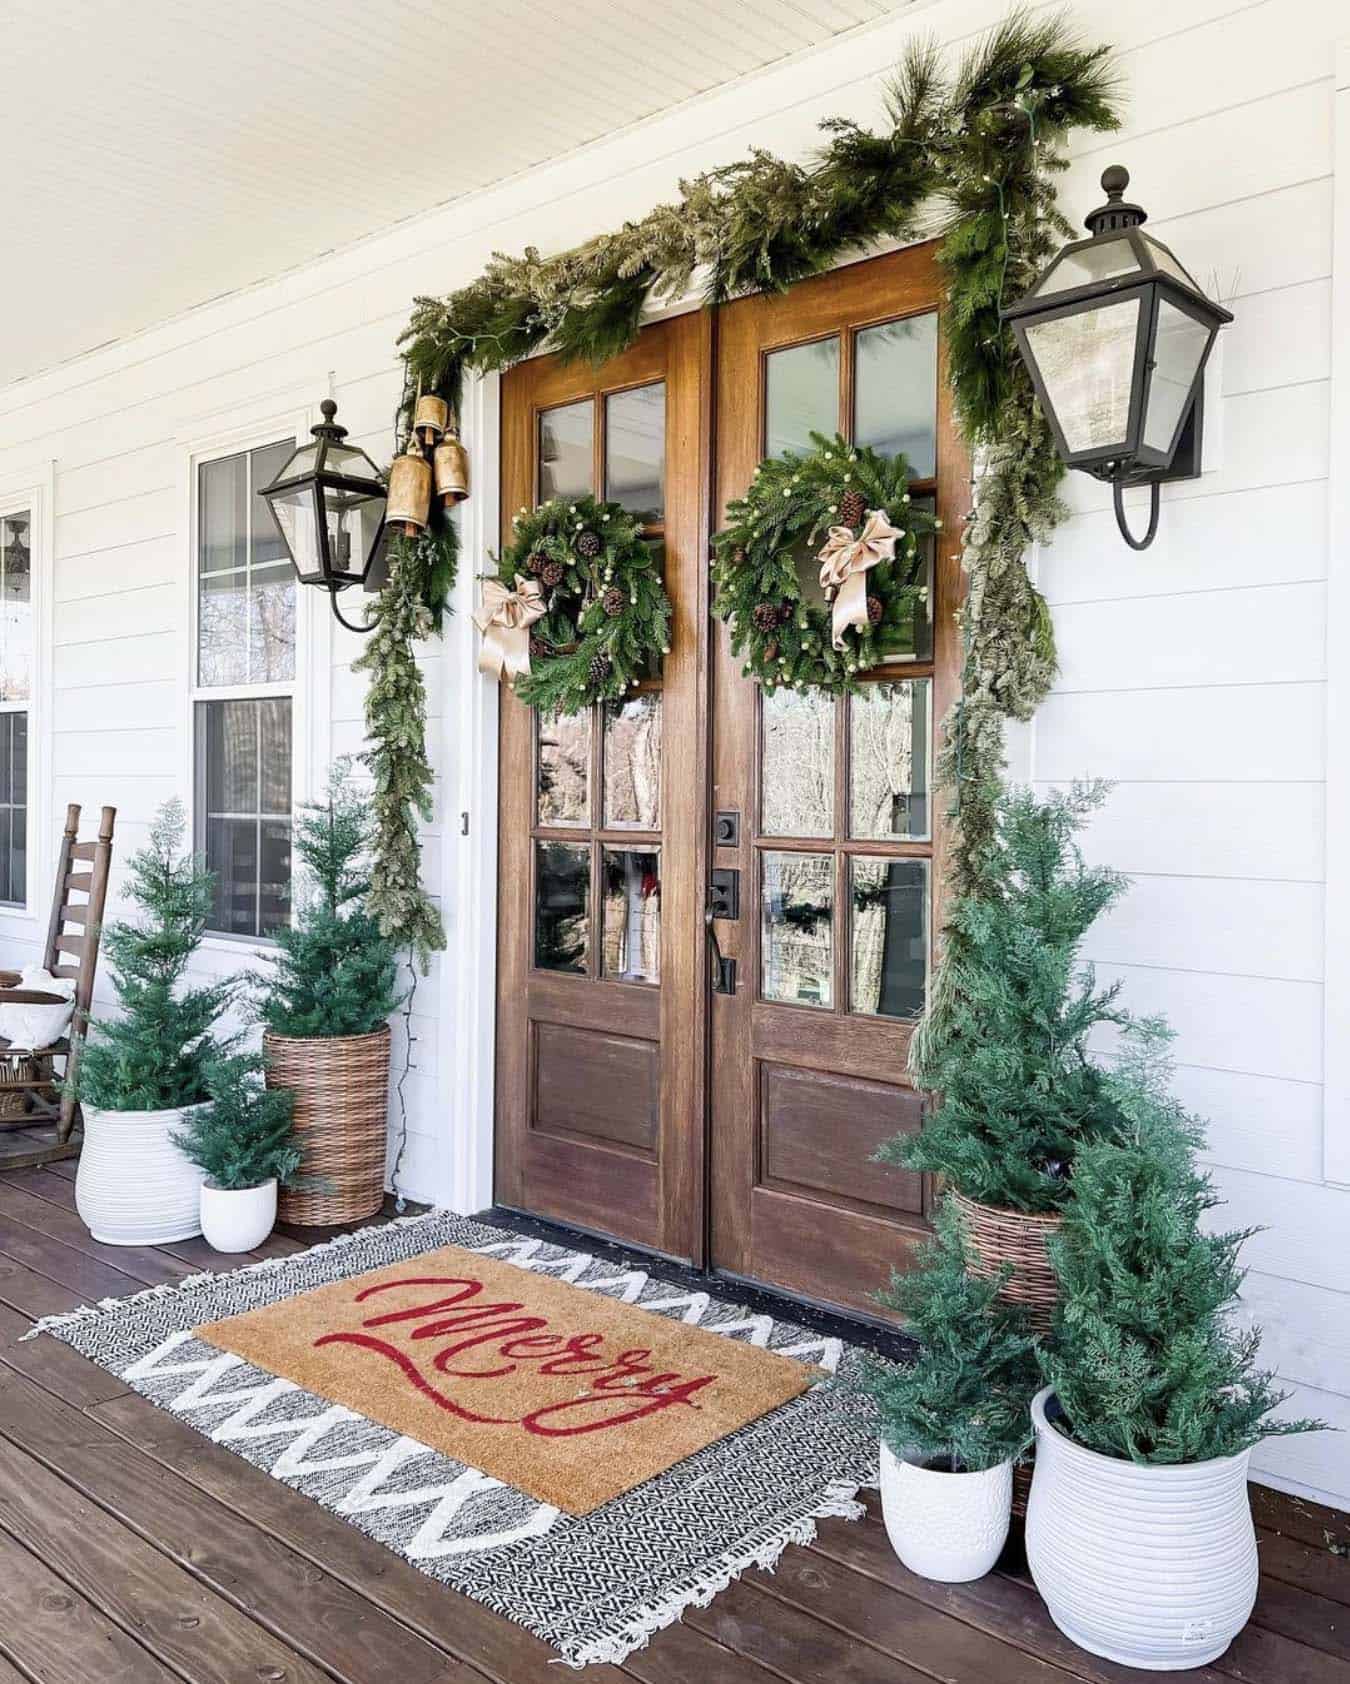 warm and inviting Christmas entry with wreaths, garland and mini trees